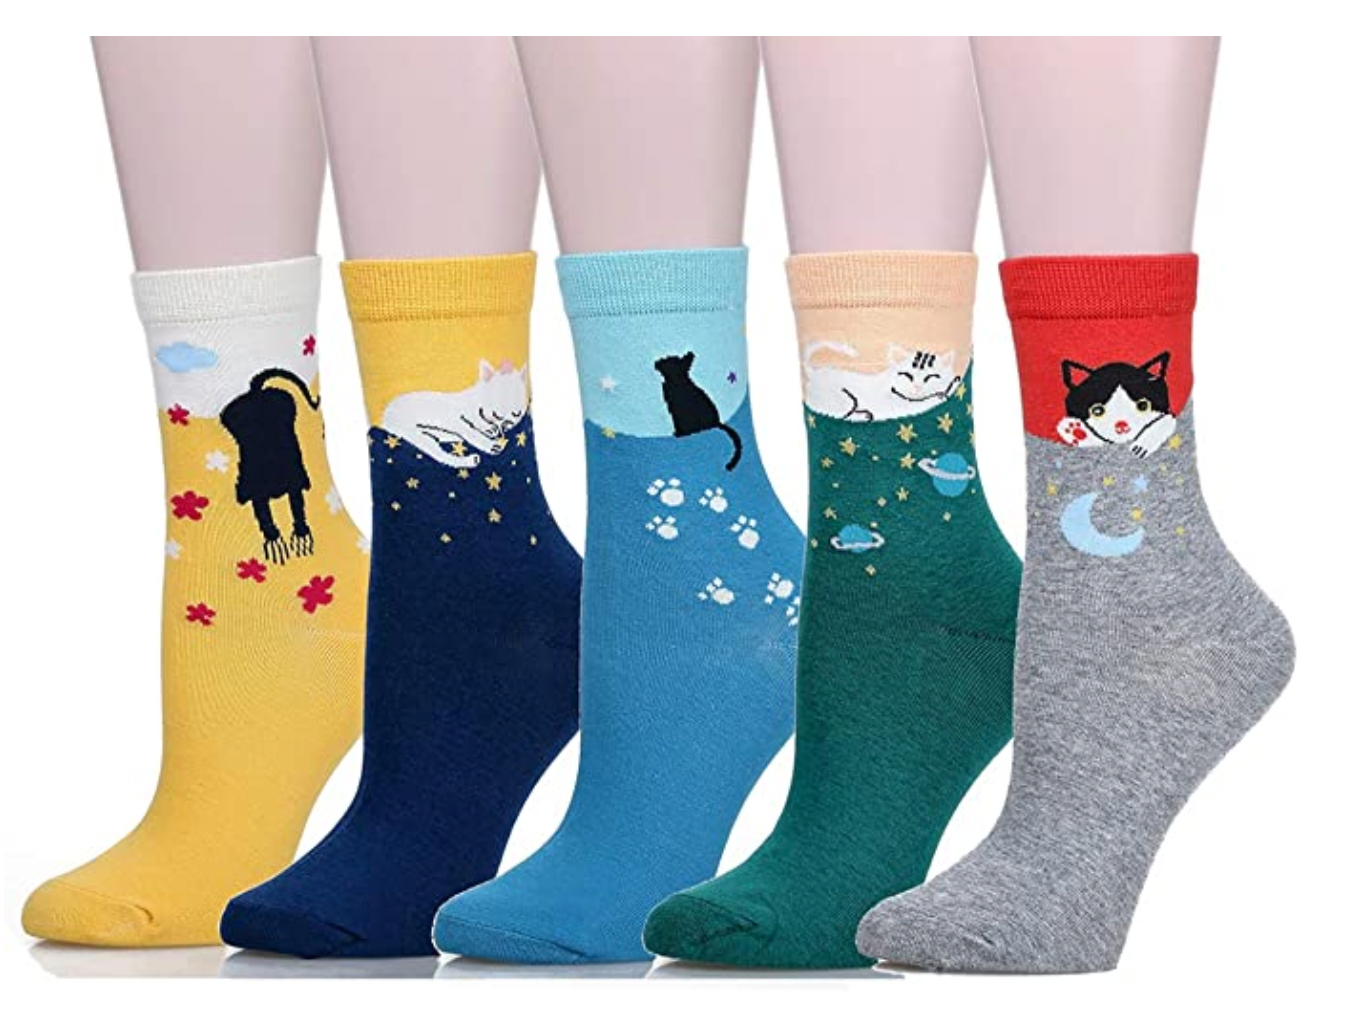 Leotruny Women's Colorful Cute Cat Crew Socks with Gift Box